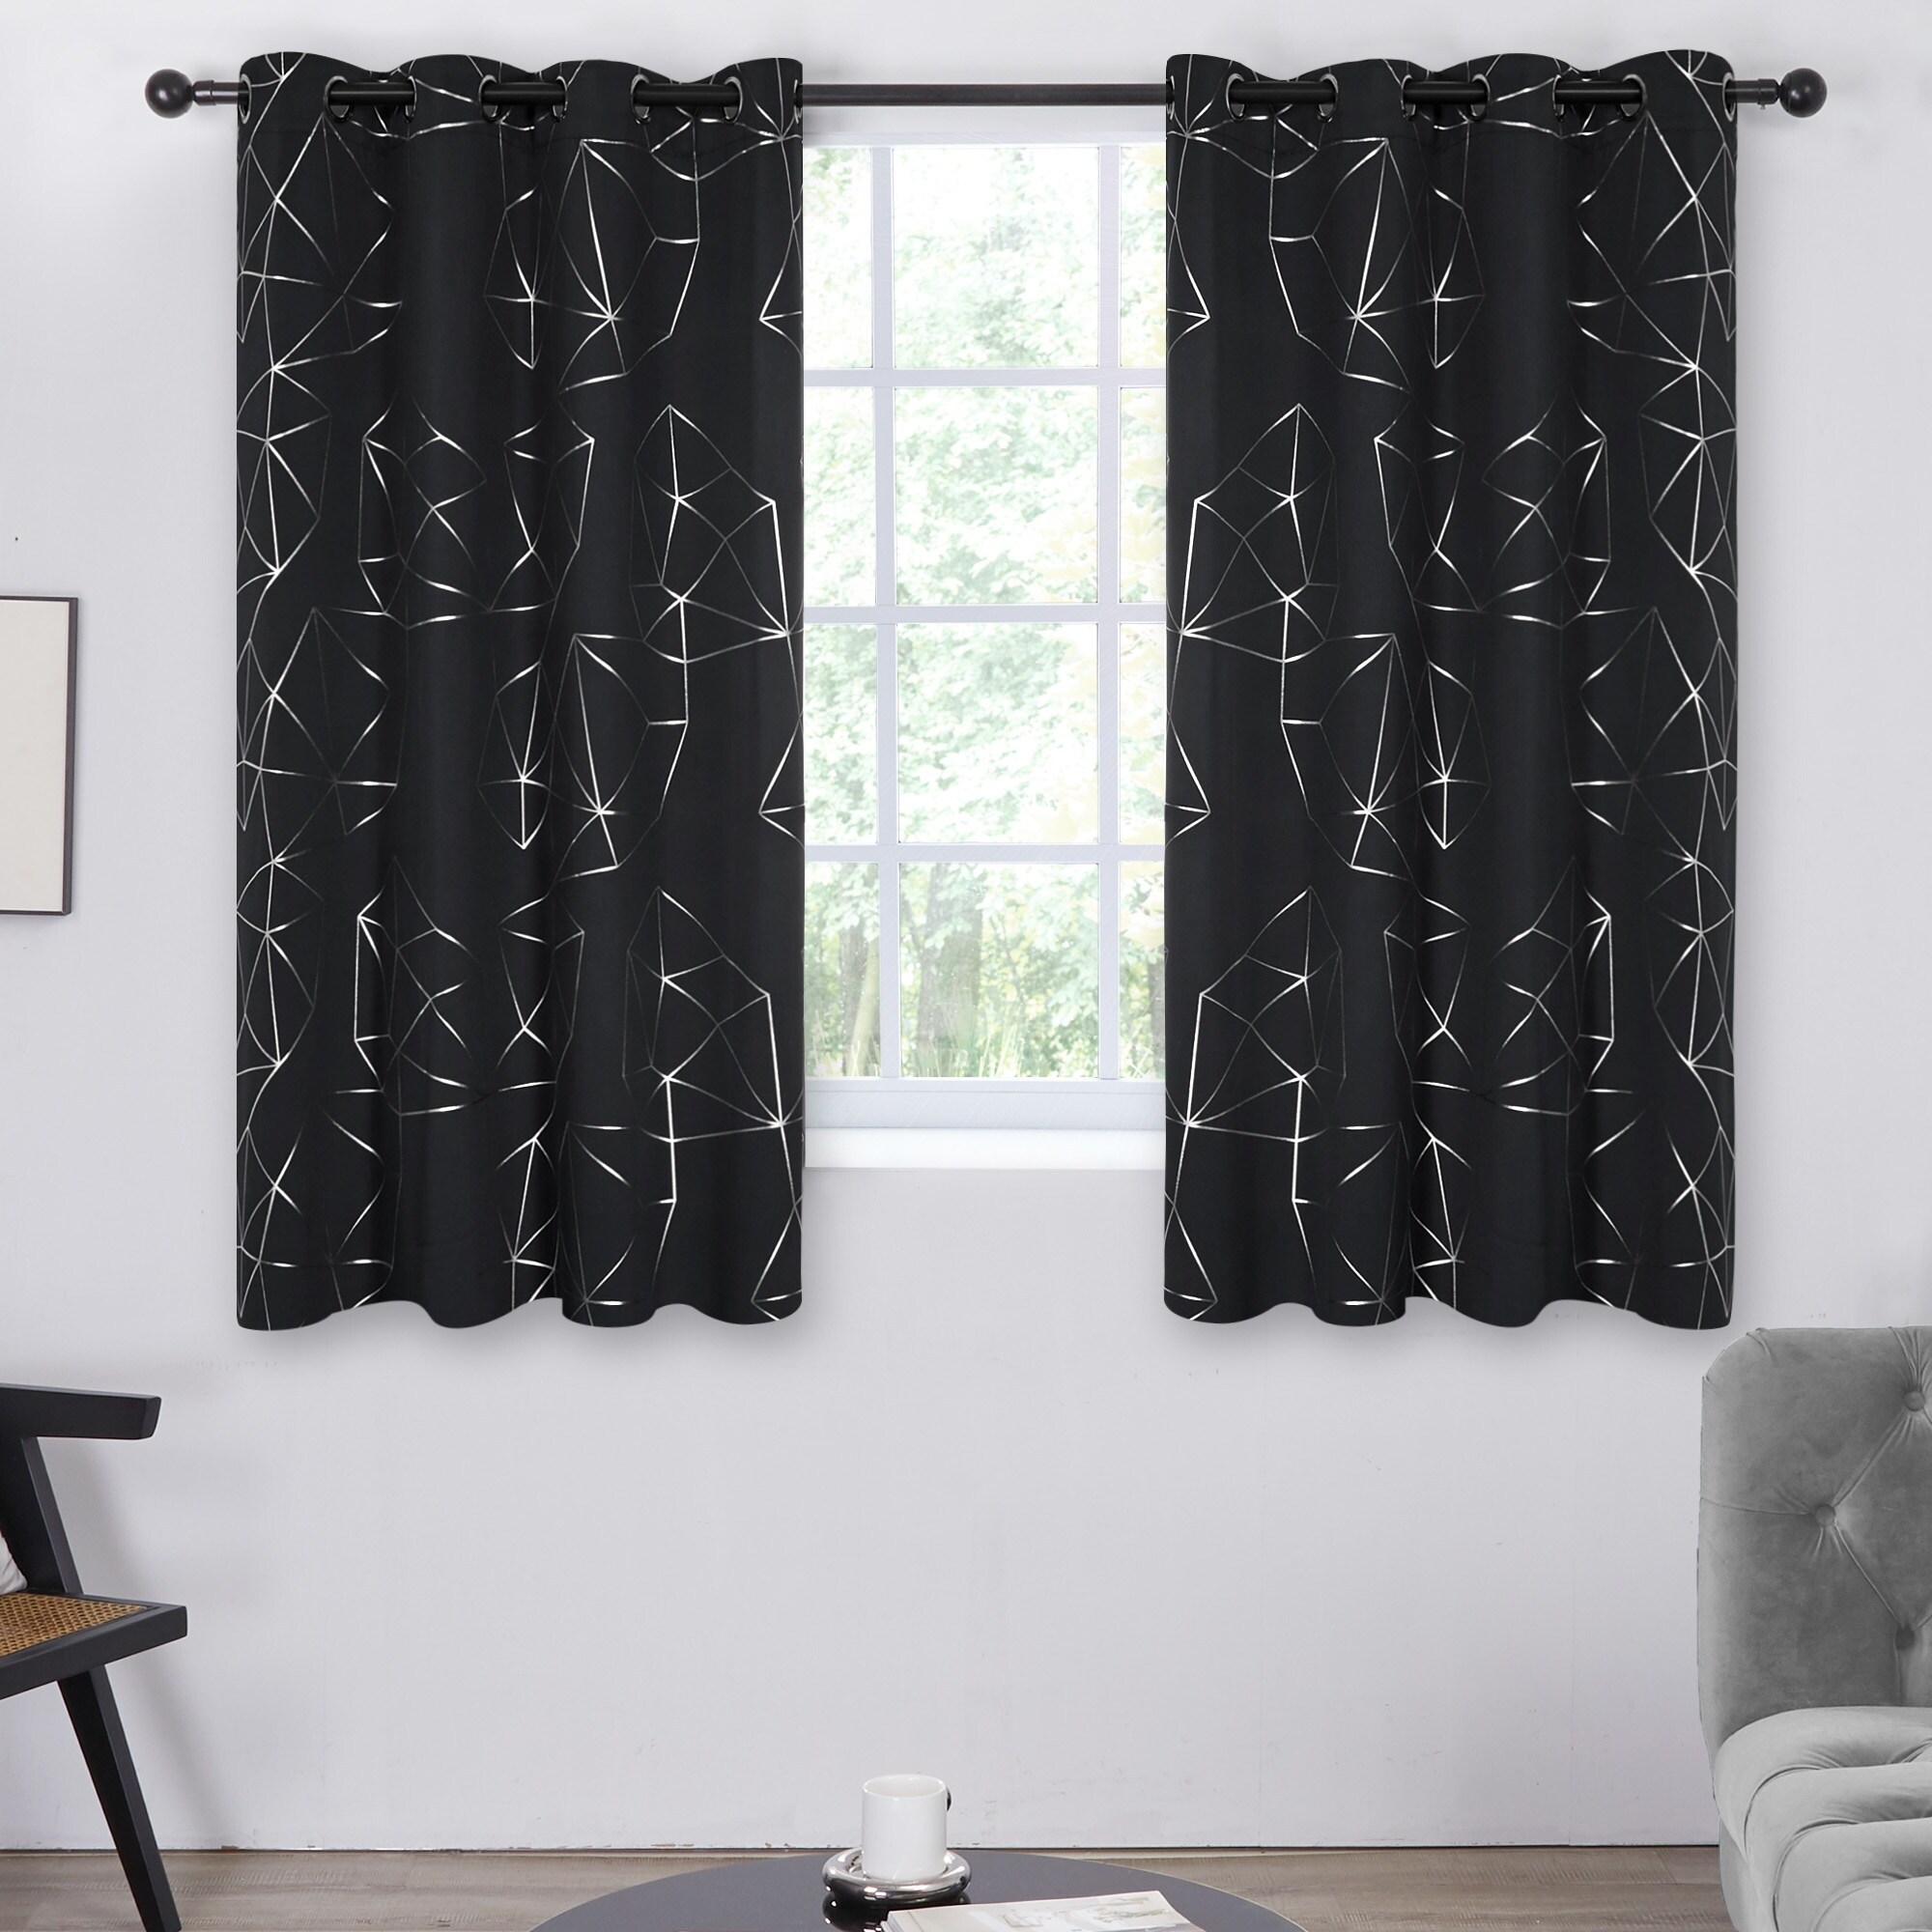  Deconovo Grey Blackout Curtains, Curtains 63 Inch Length 2  Panels, Constellation Pattern Foil Printed Curtain, Grommet Light Blocking  Curtains, Thermal Insulated Curtains for Bedroom, 42 x 63 Inch : Home &  Kitchen